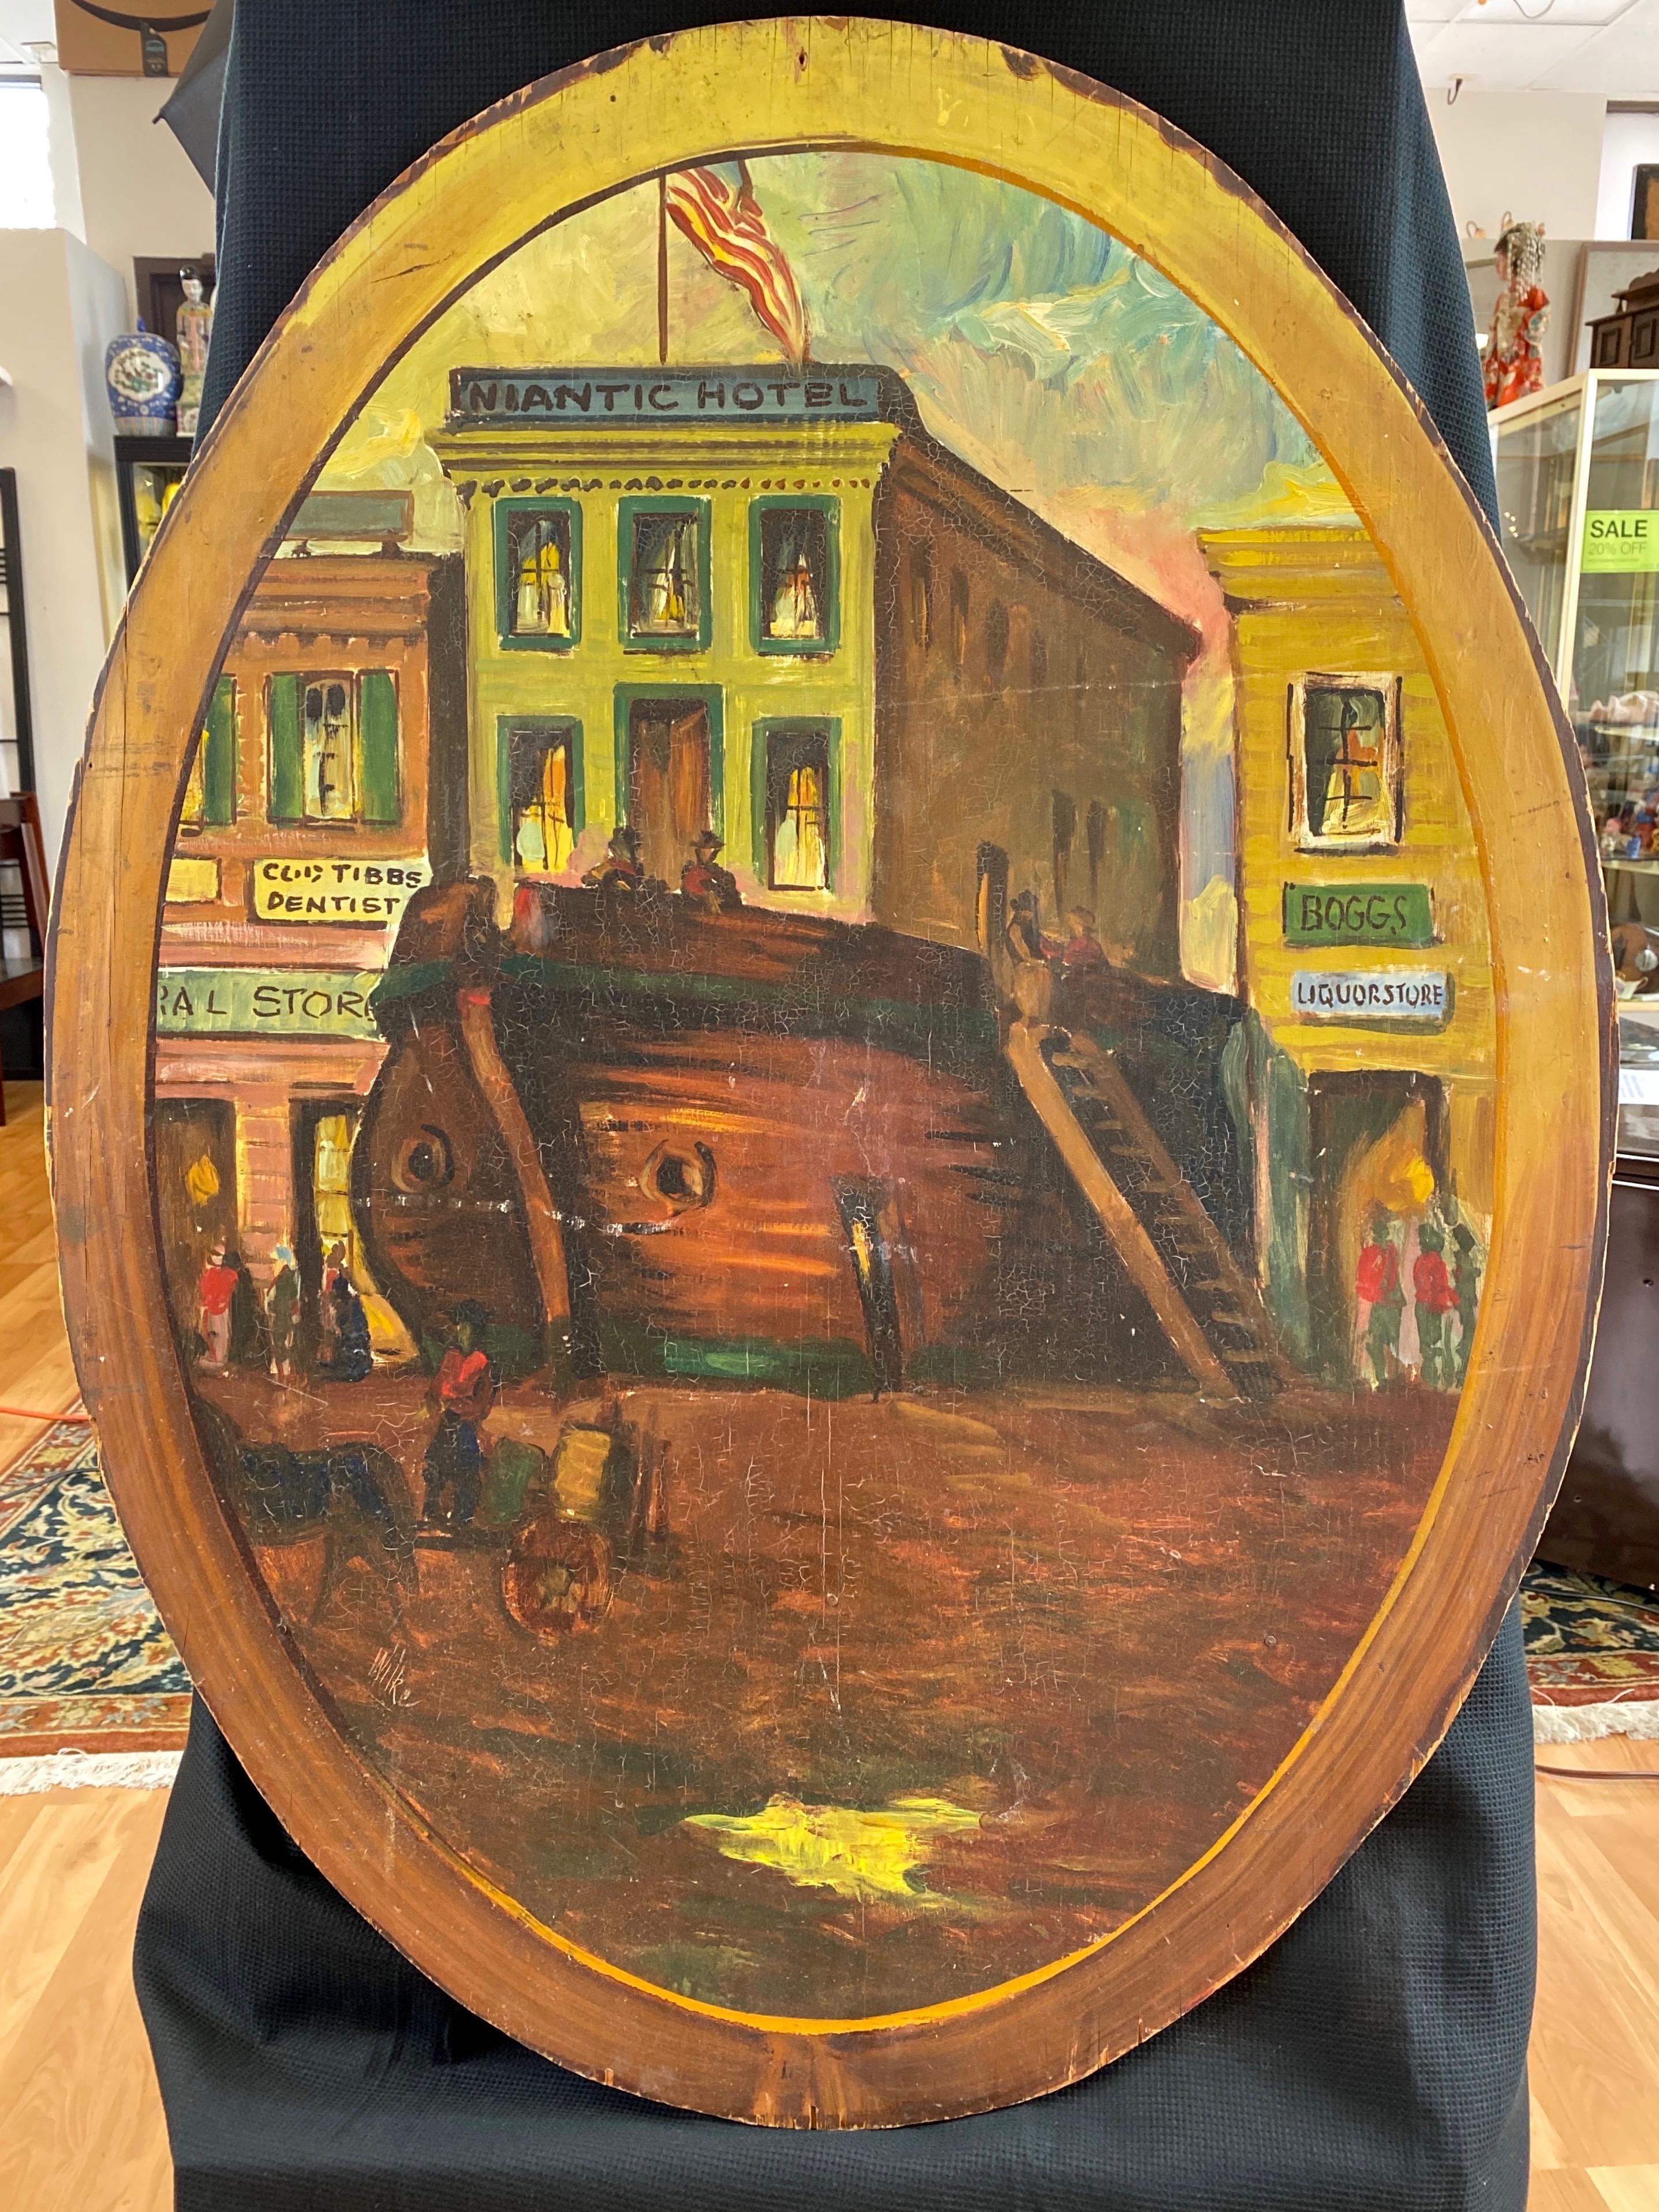 A large and evocative impressionist oil painting on oval panel by William Wilke depicting the California Gold Rush-era ship Niantic and the namesake hotel that arose from its hull, pictured as the iconic San Francisco site would’ve looked in 1850.